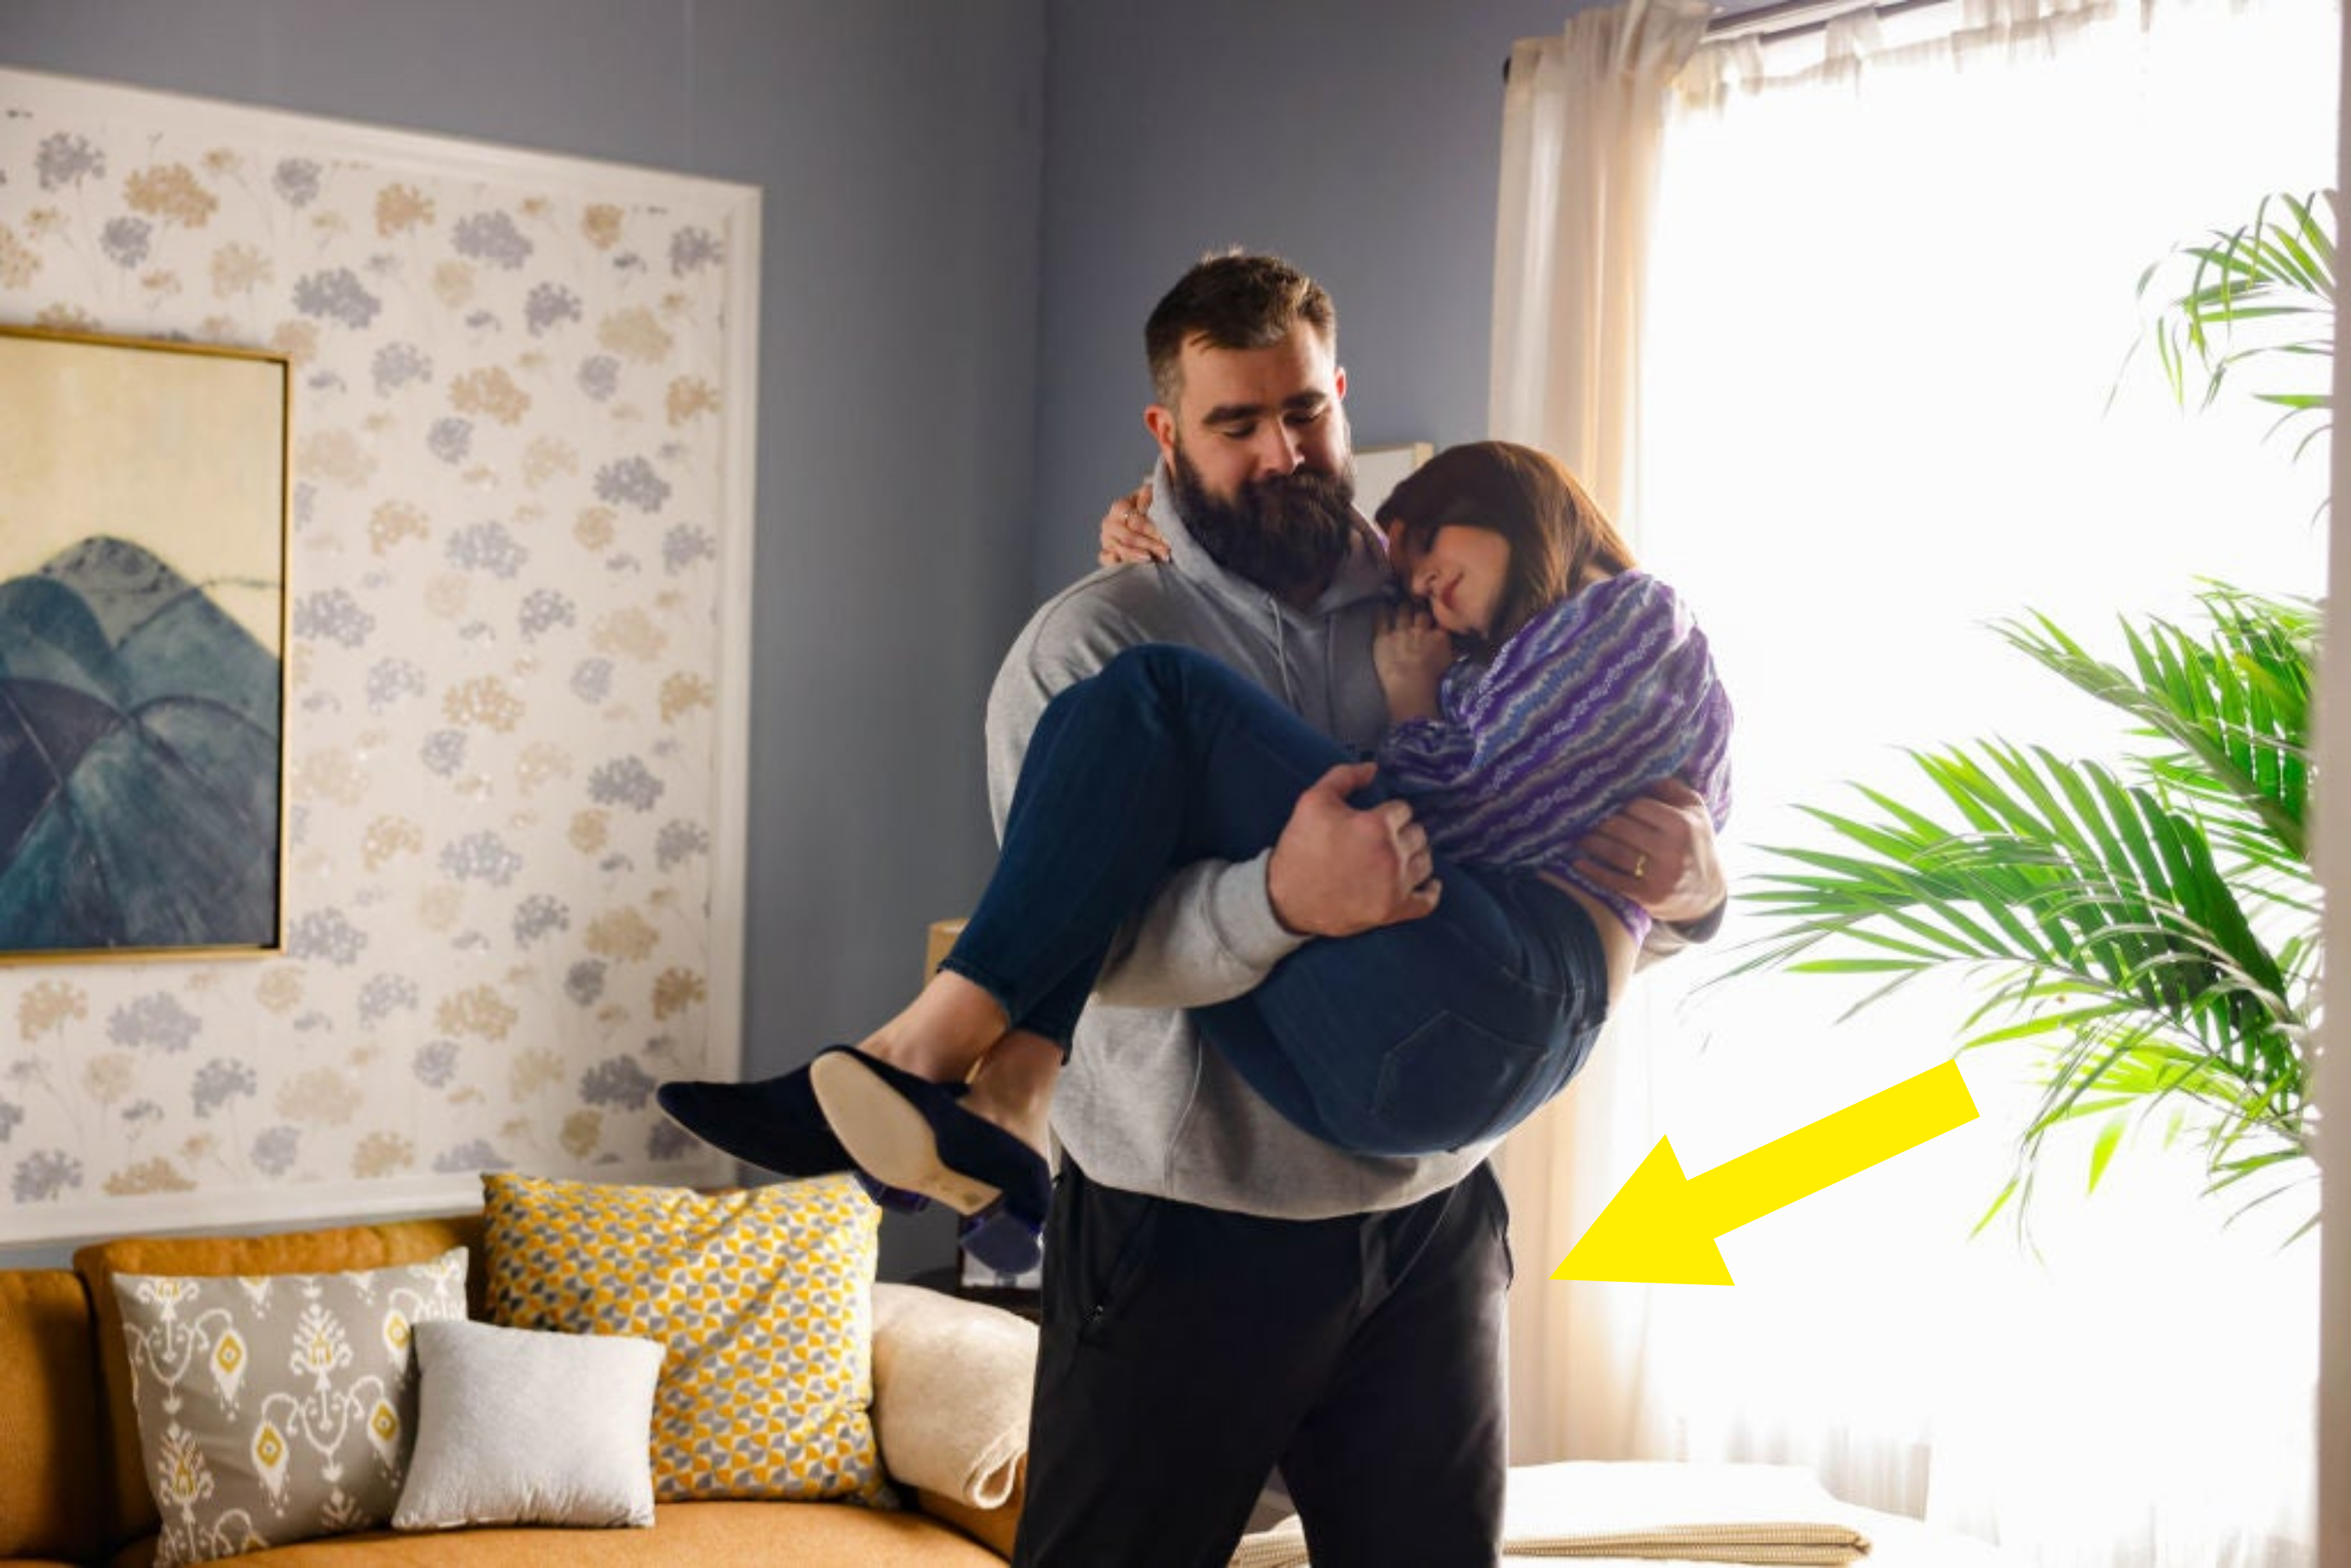 Jason Kelce holding a woman in a comforting embrace in a cozy room during an SNL sketch